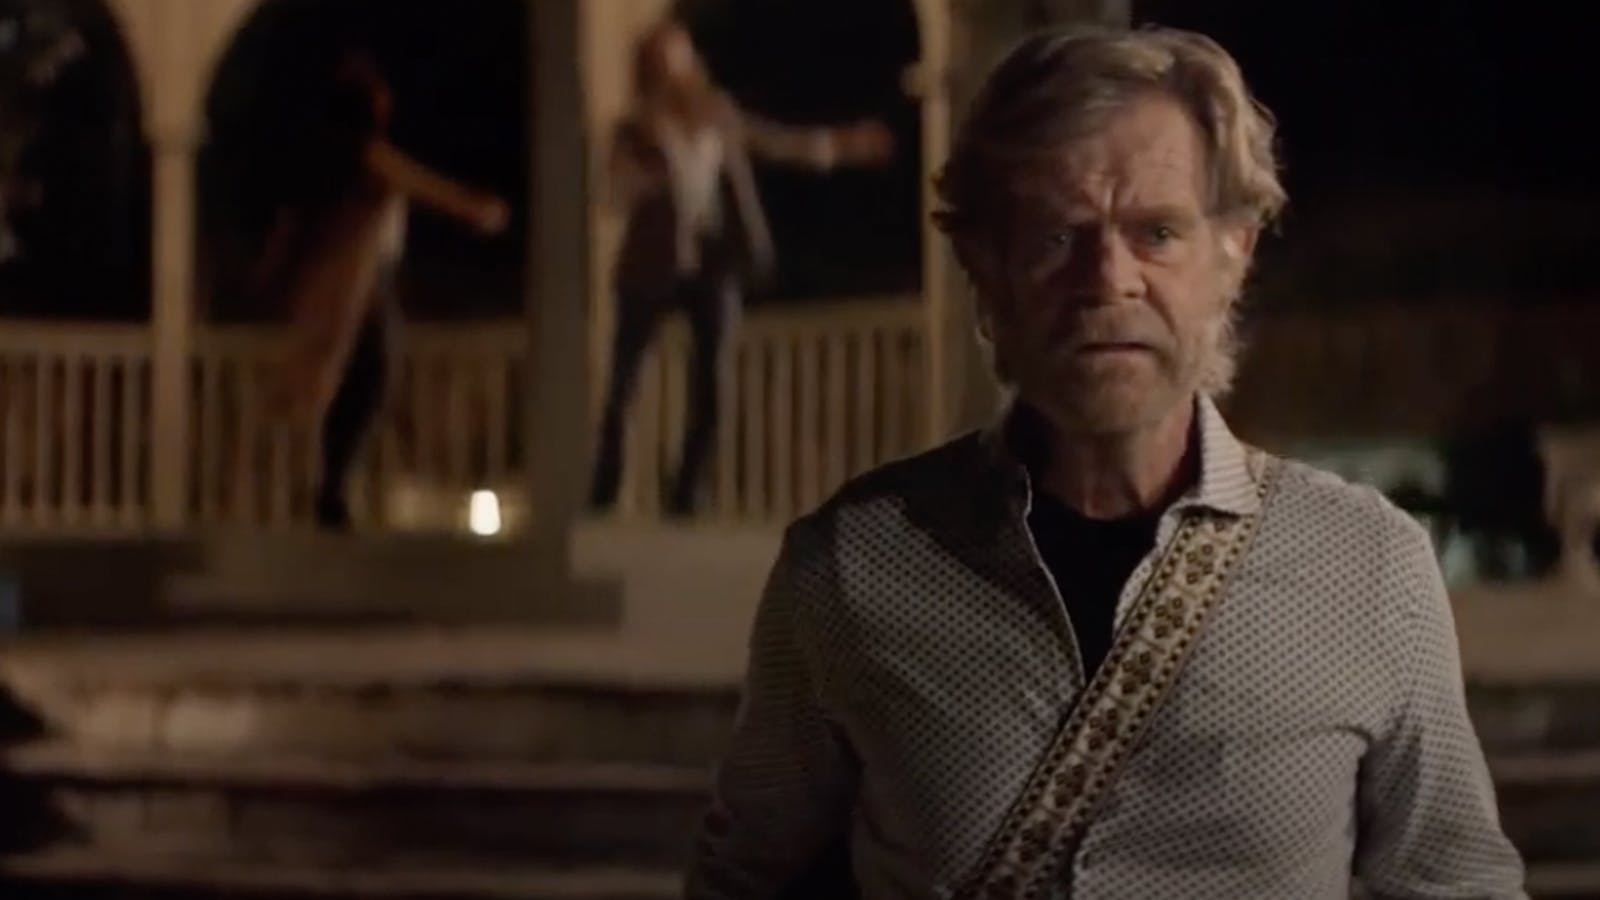 Actor William H. Macy wears a robe in the dark in front of a house as someone behind him calls his name.